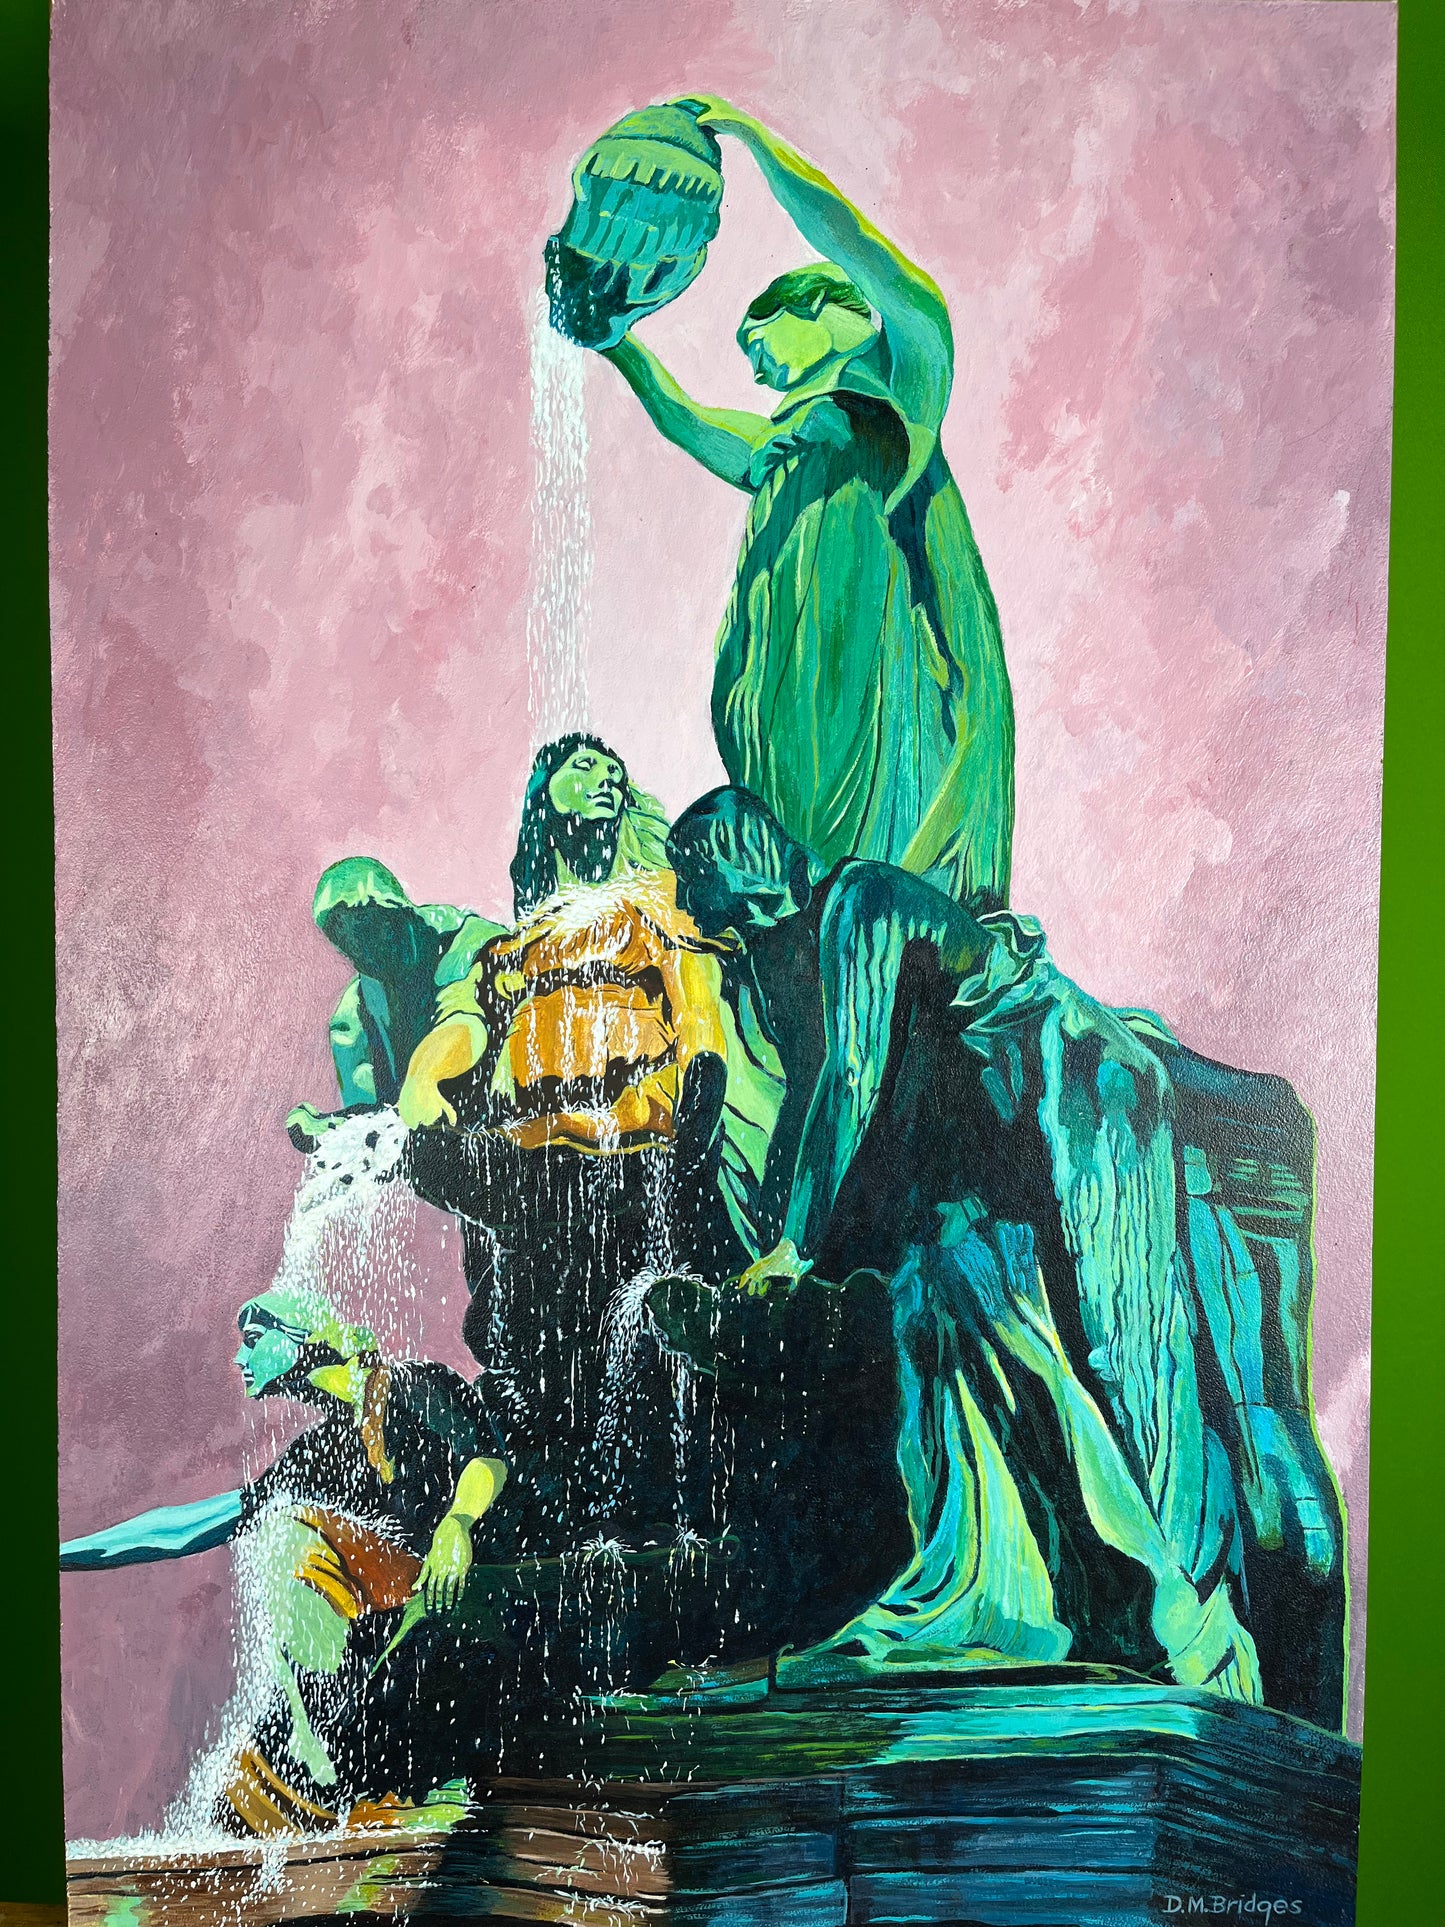 Limited Edition “Great Lakes Fountain” Acrylic Painting by David M. Bridges